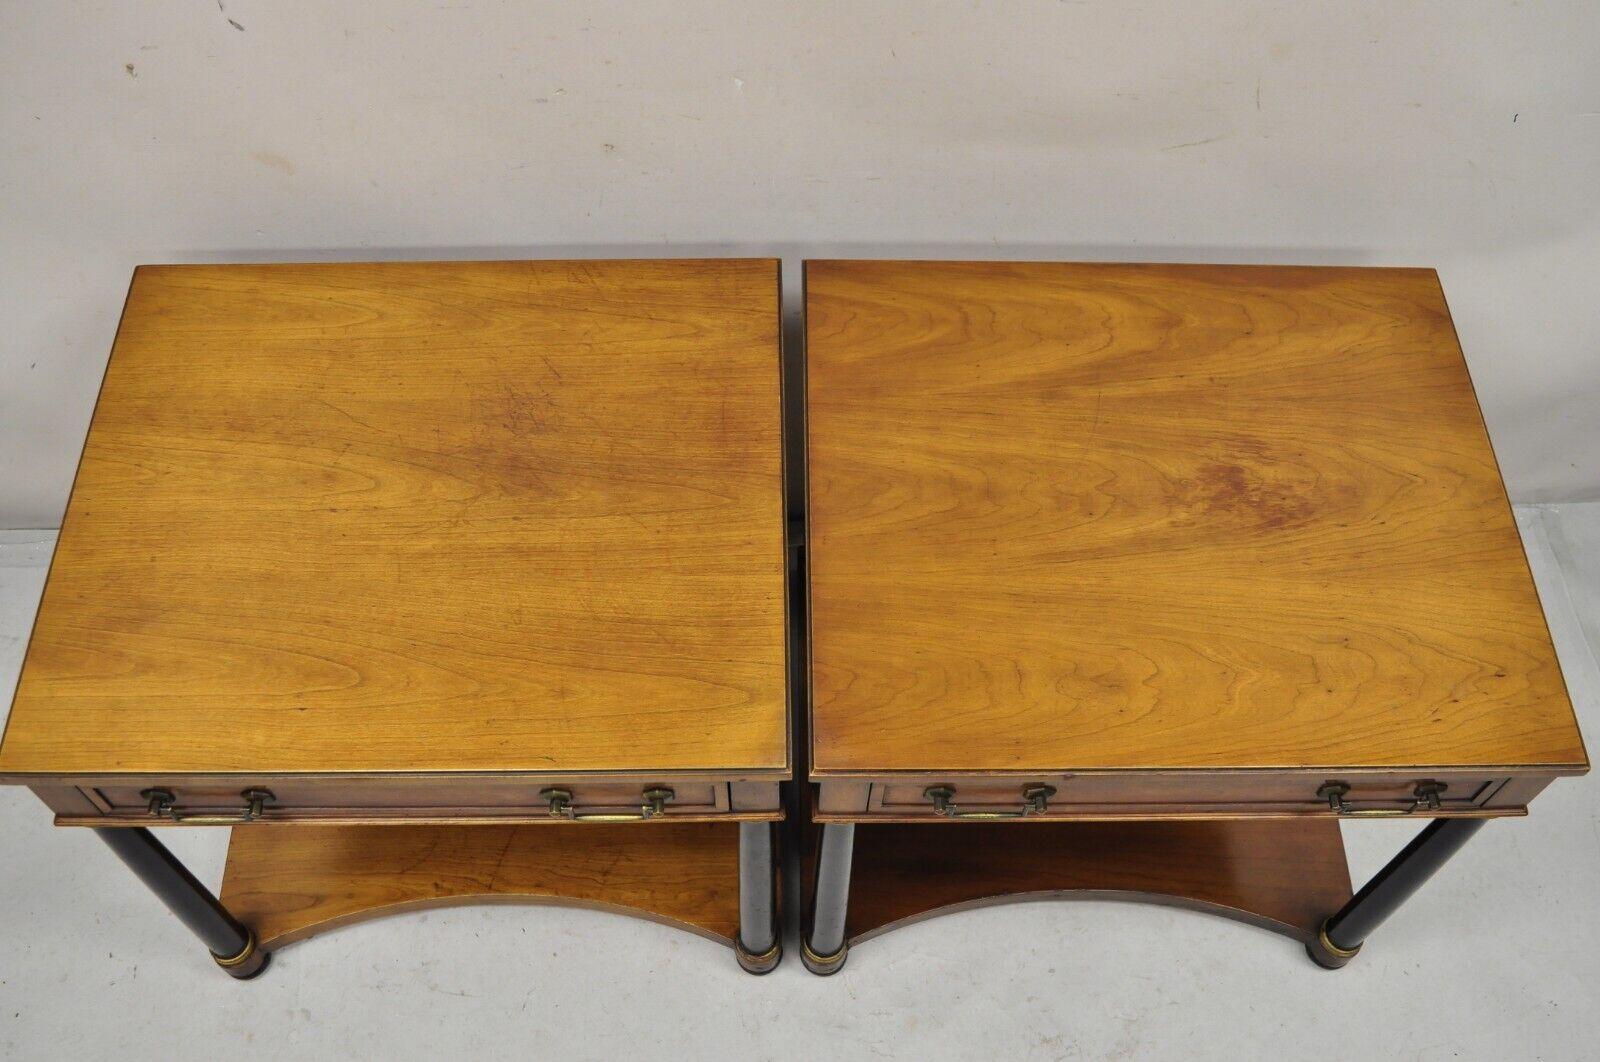 Century French Empire Style Cherry Wood Black Column 1 Drawer End Tables - Pair In Good Condition For Sale In Philadelphia, PA